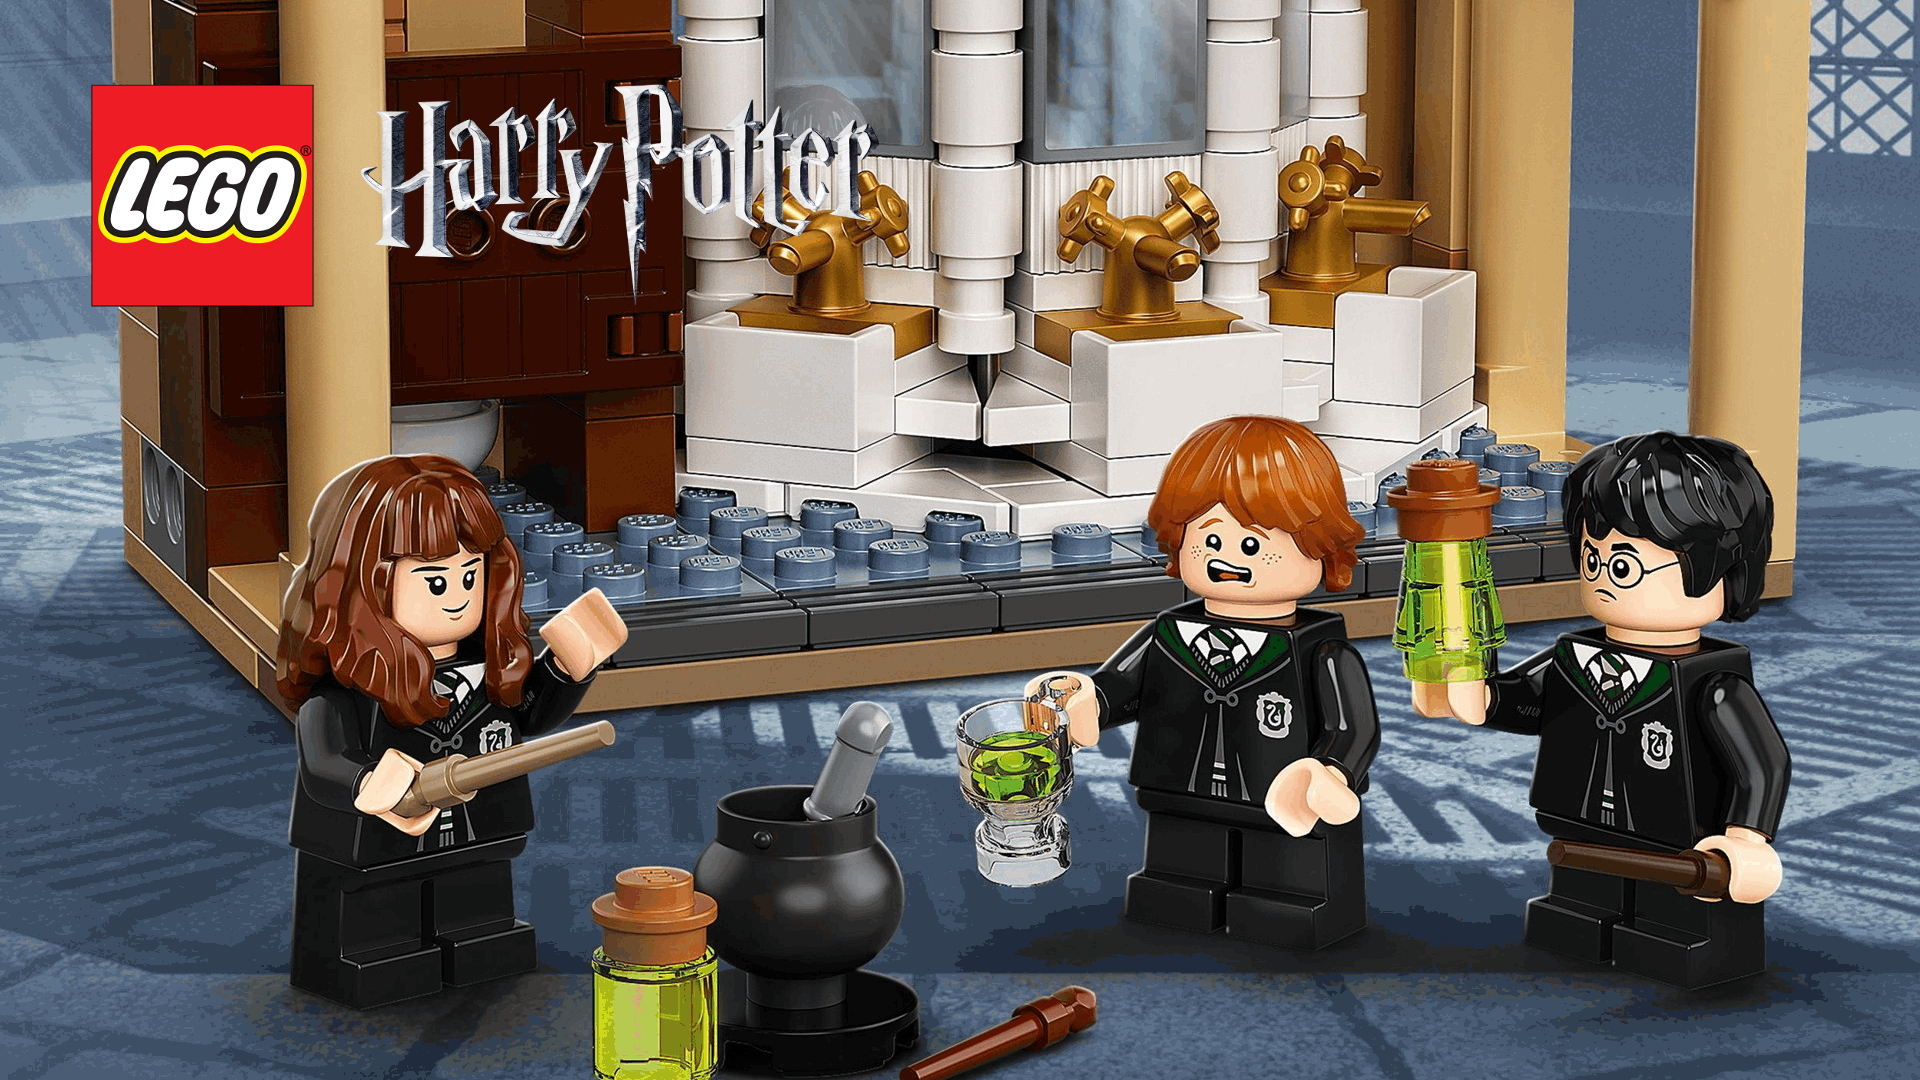 Polyjuice Potion Mistake 76386 Bathroom Building Kit with Minifigure Transformations; New 2021 217 Pieces LEGO Harry Potter Hogwarts 